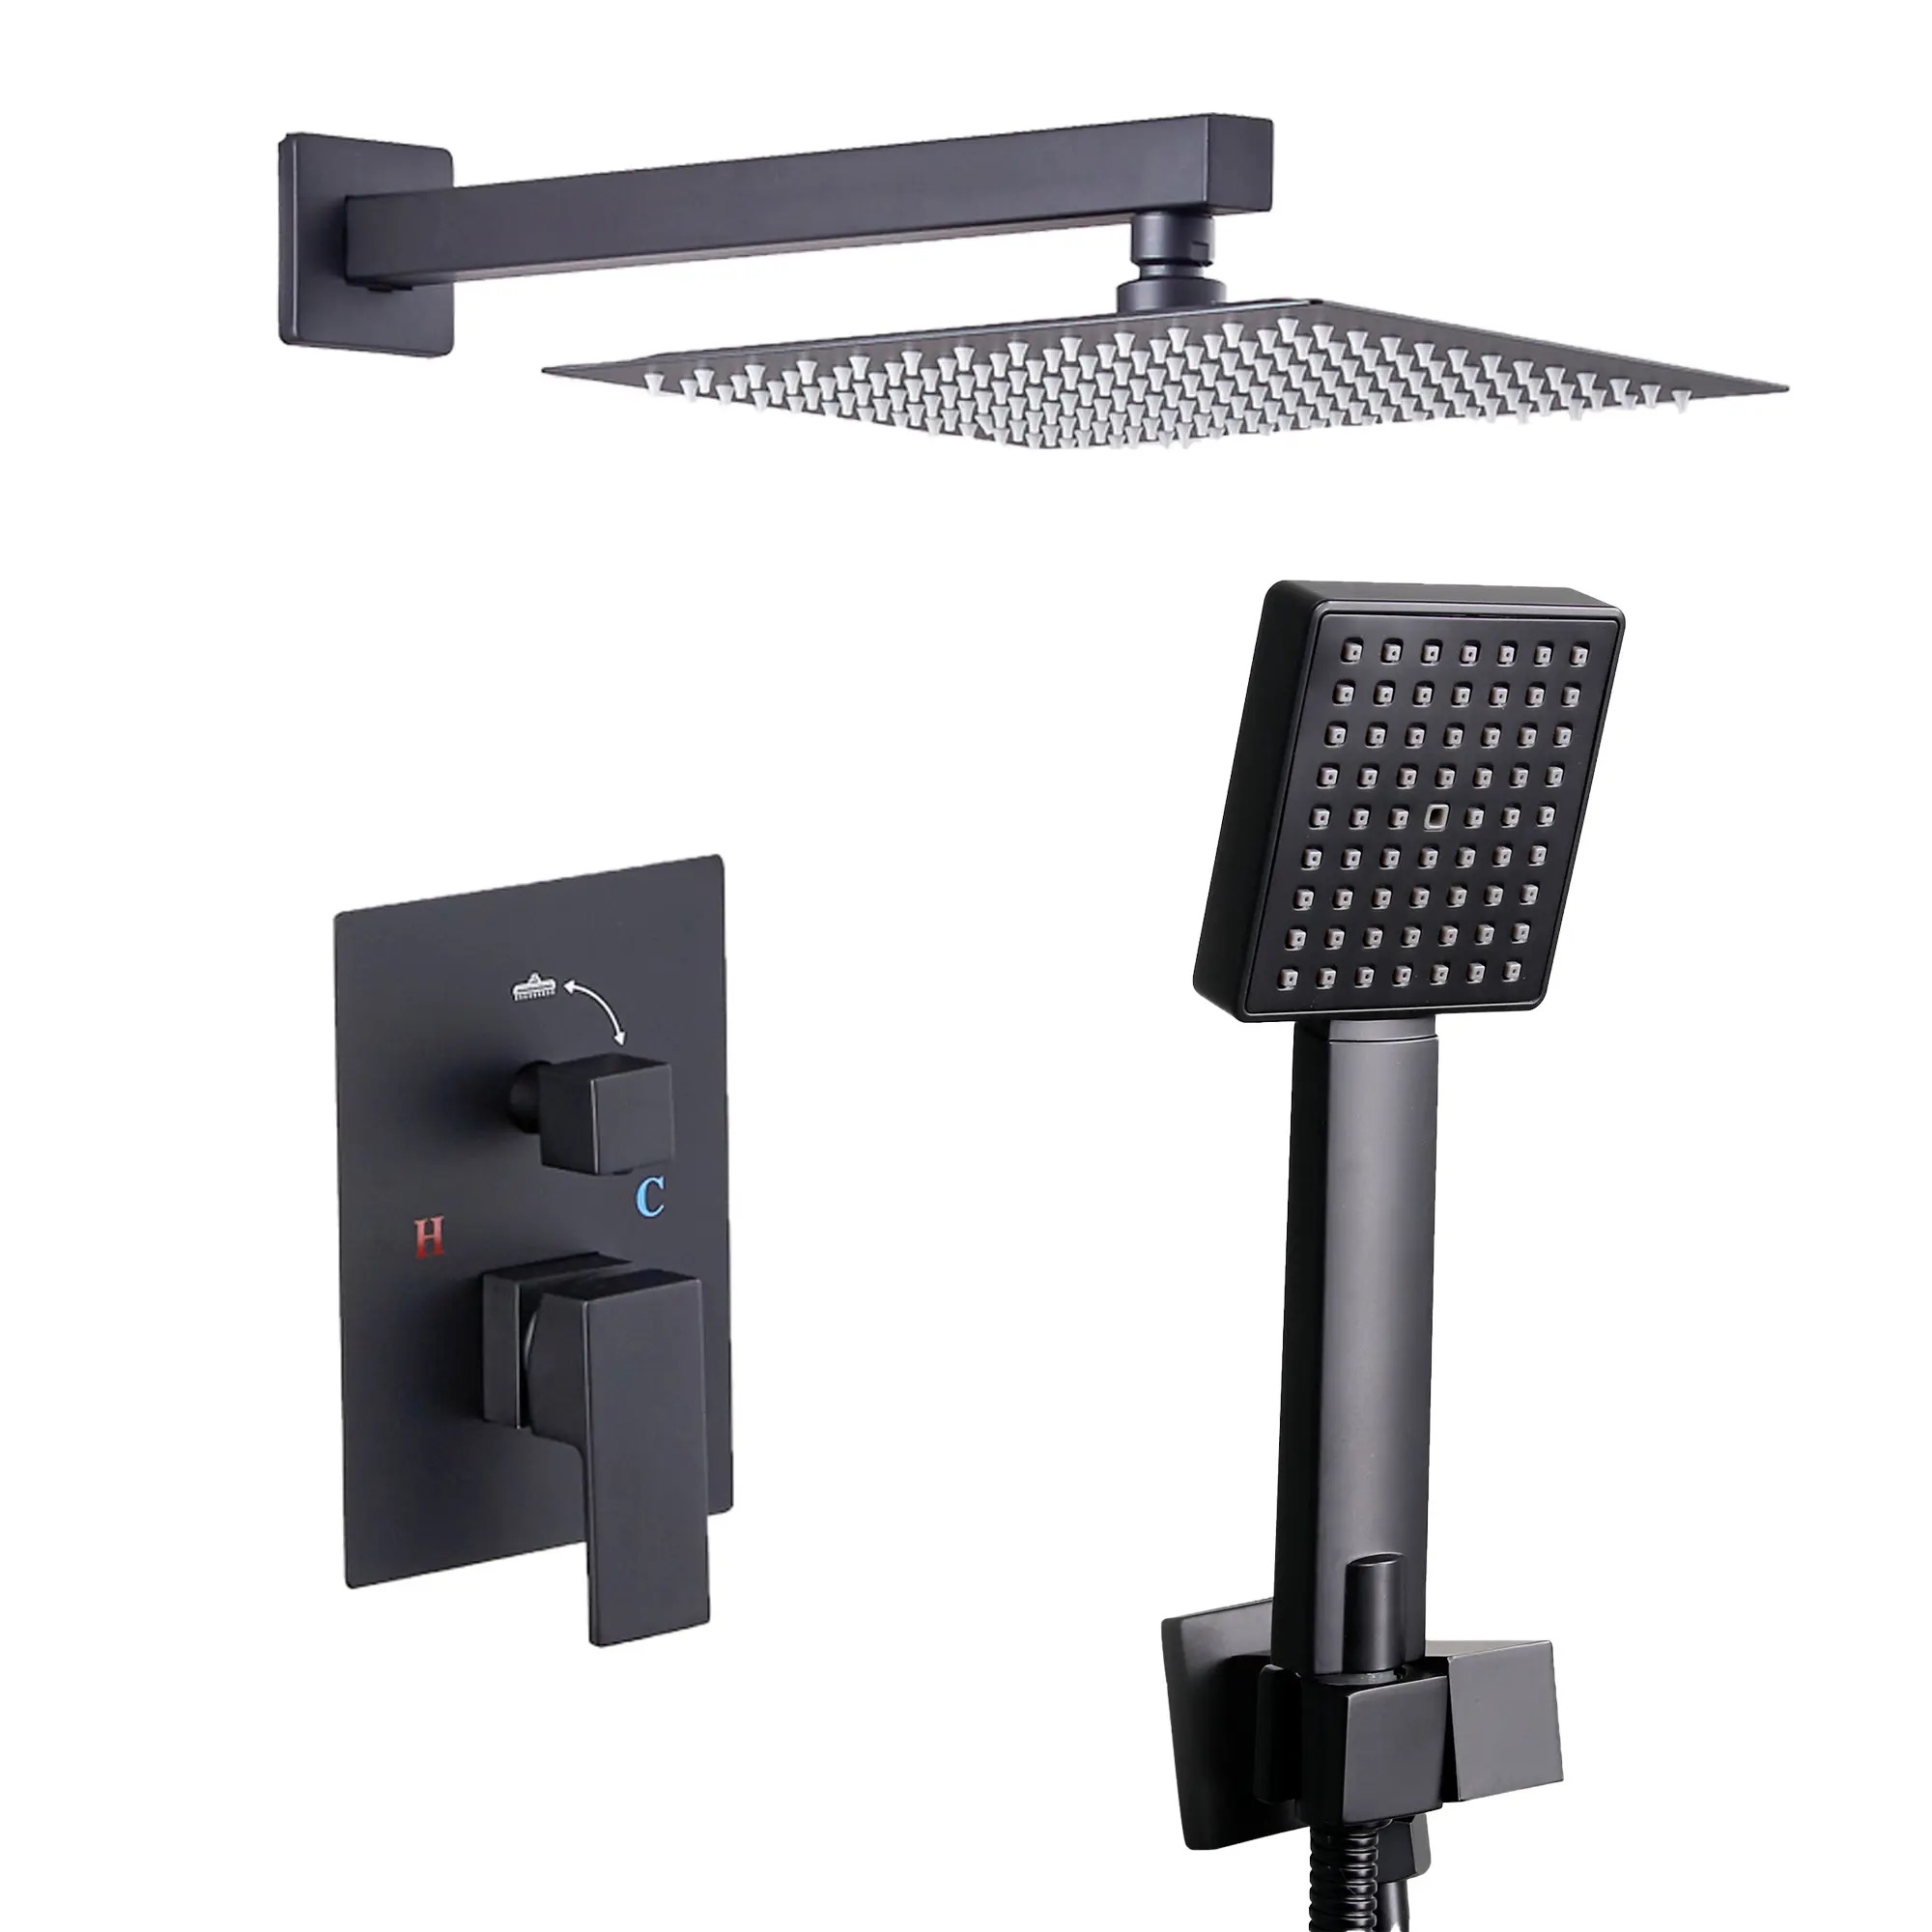 Black wall mount bathroom concealed shower mixers